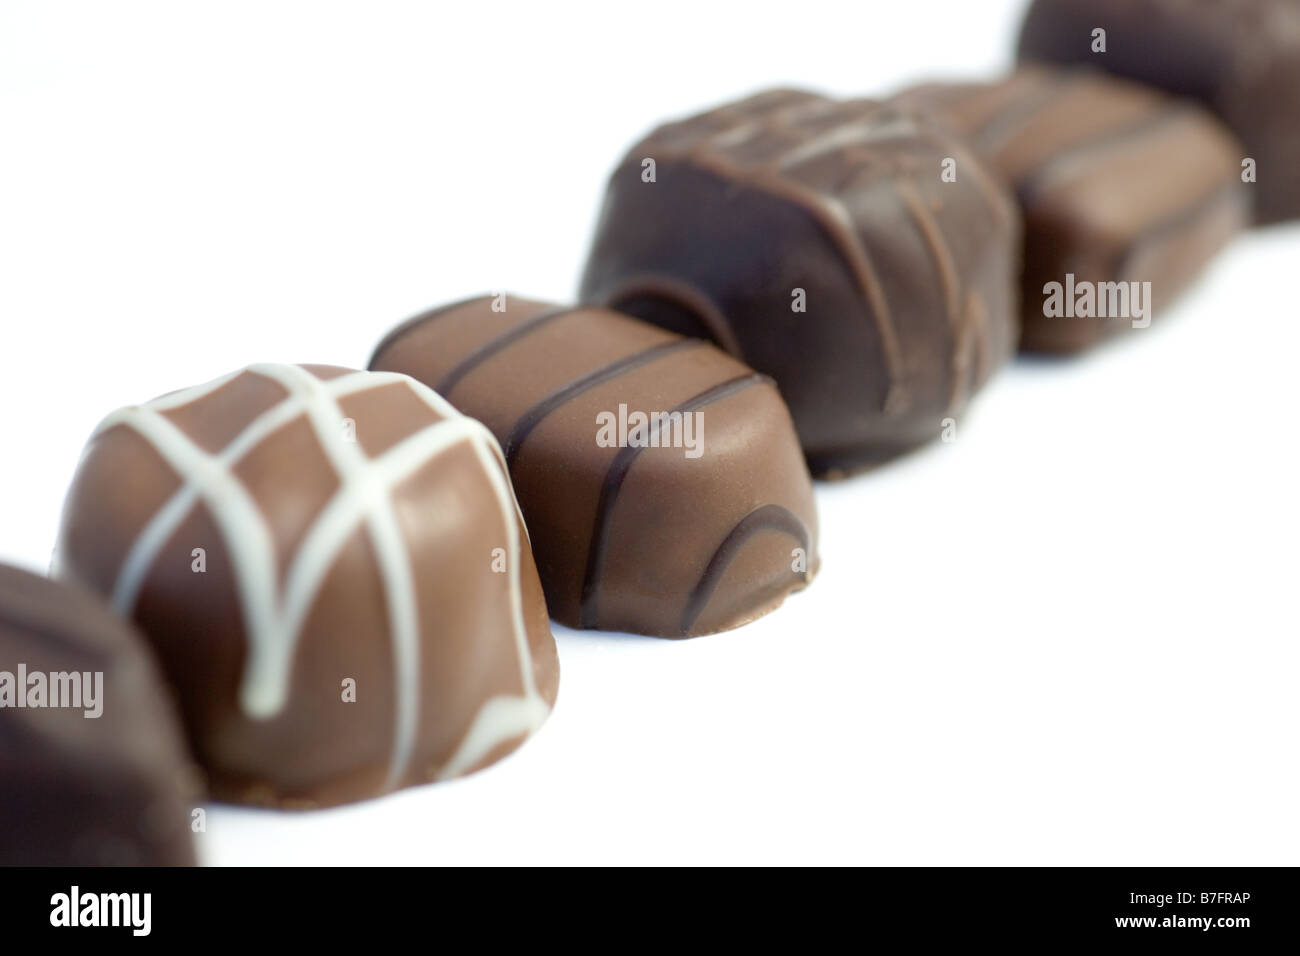 Chocolates in a row Stock Photo